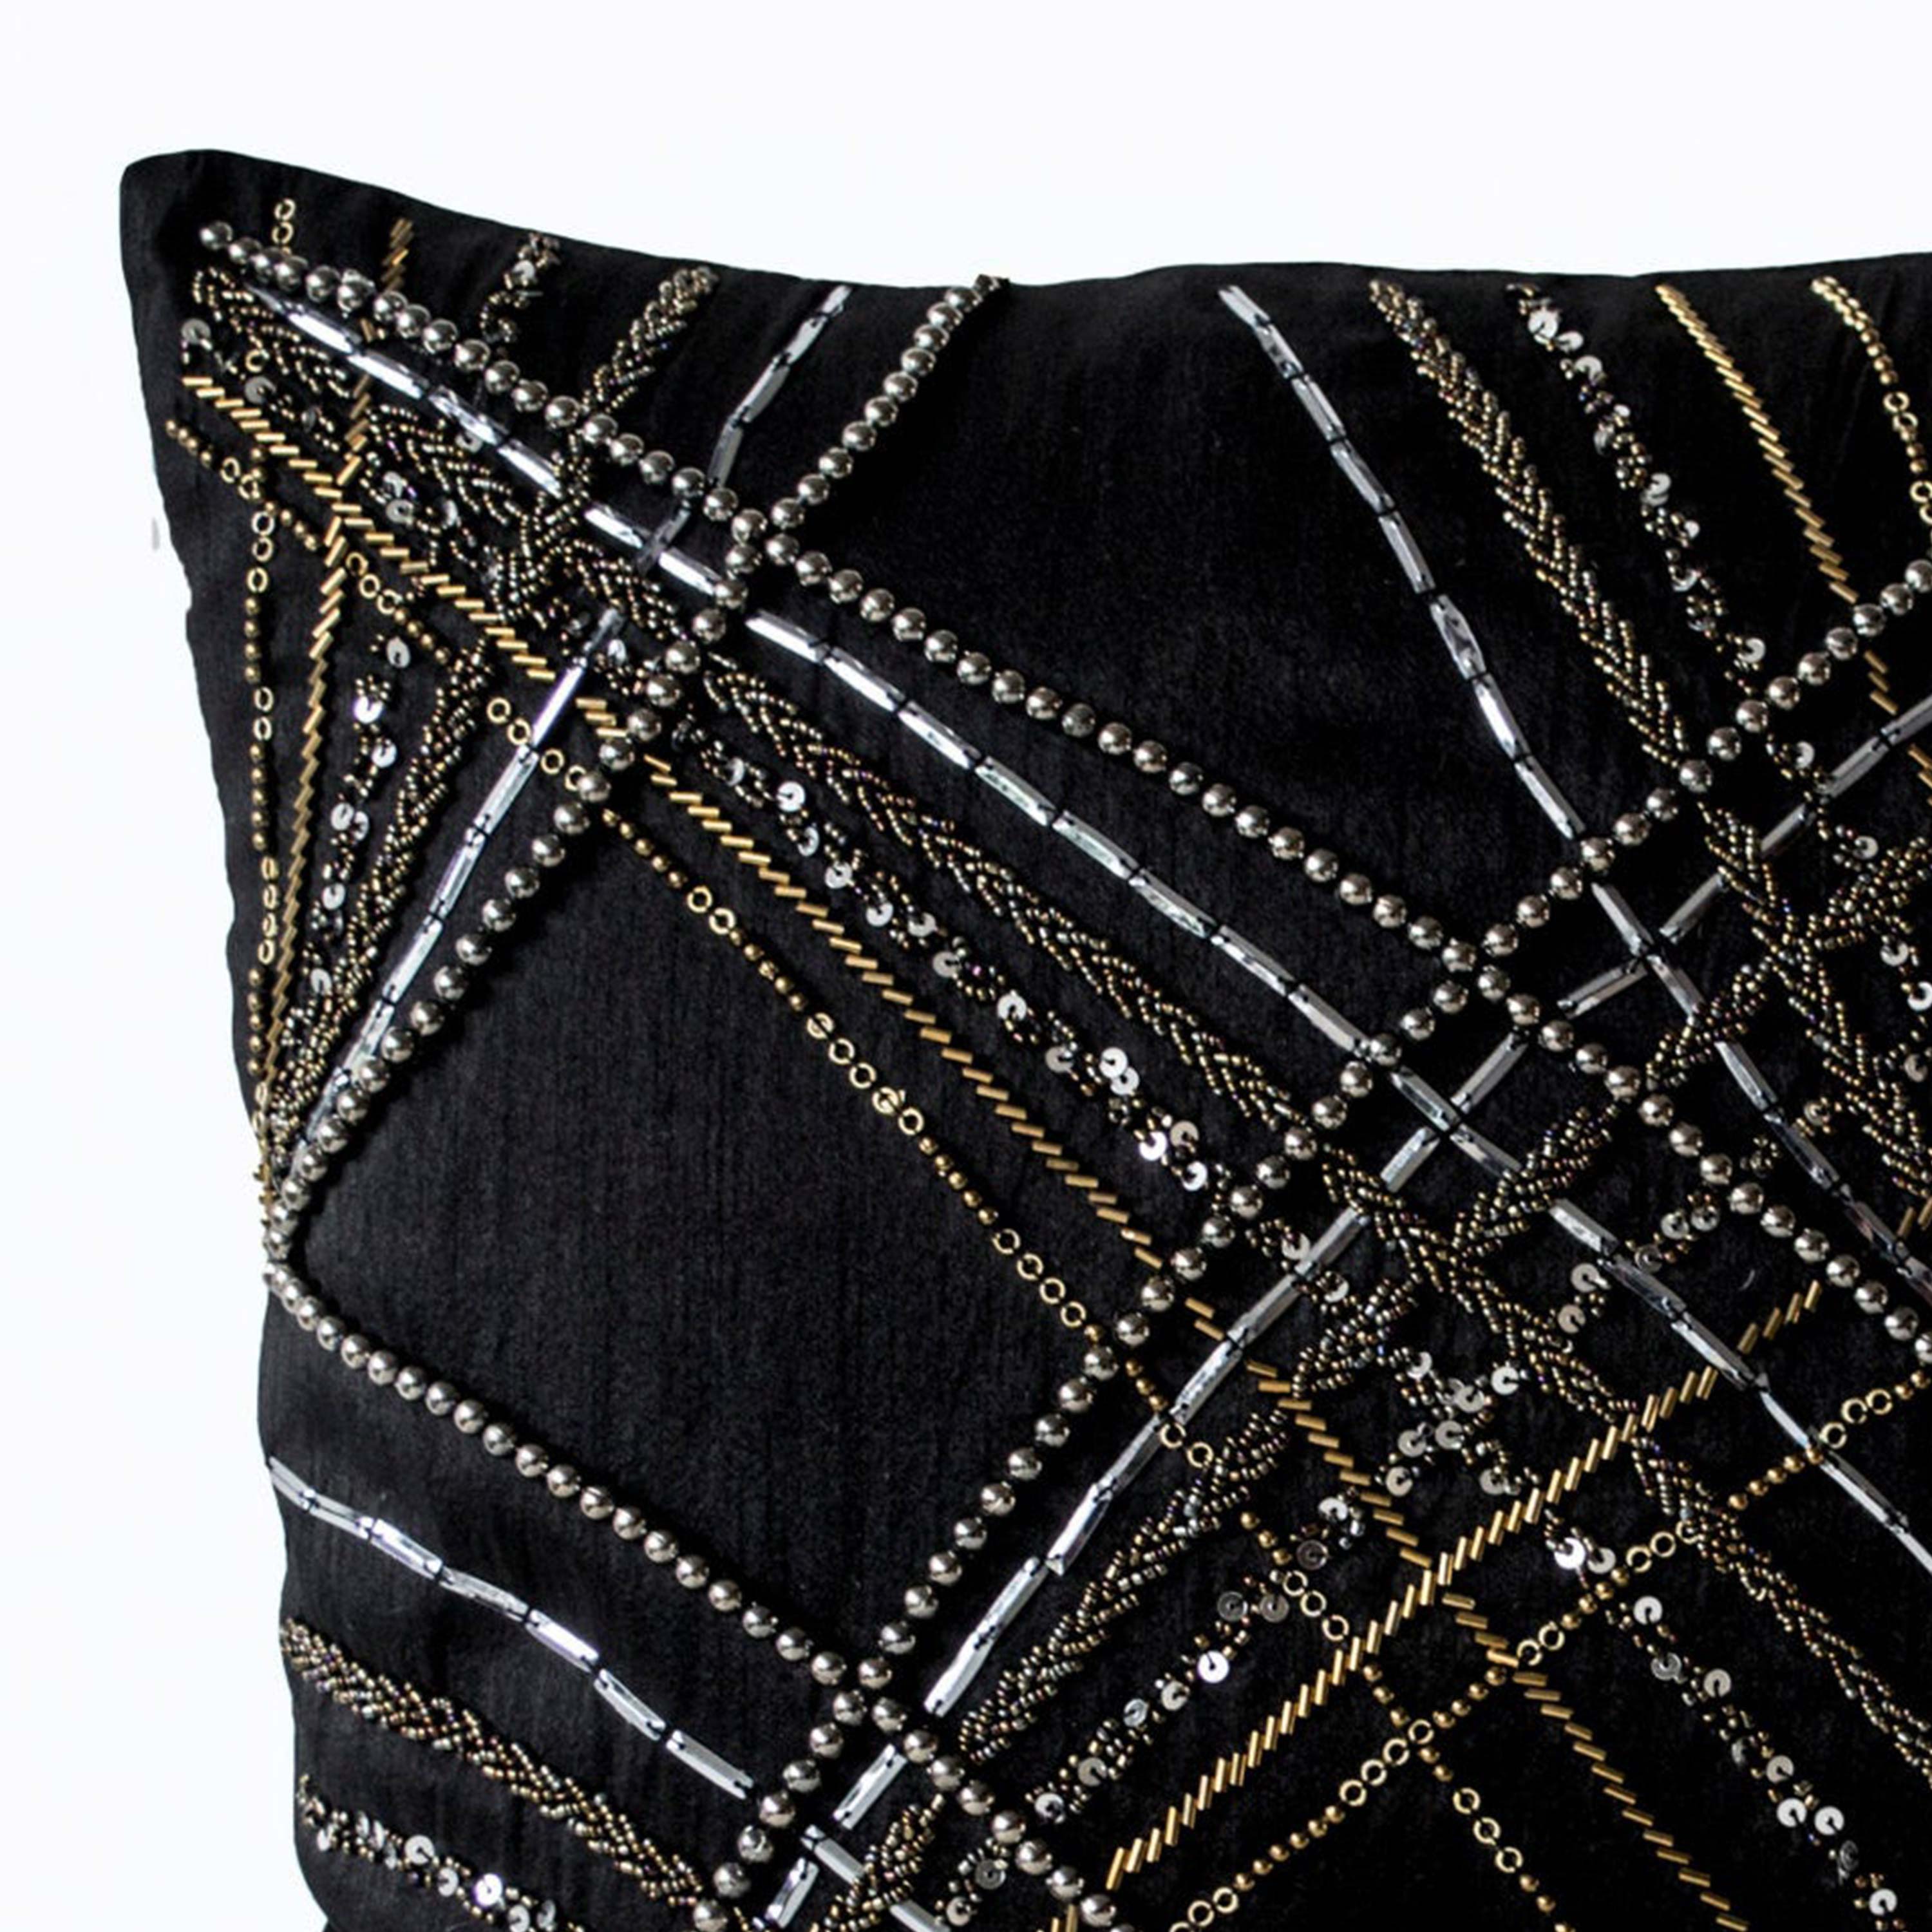 Throw Pillow Covers in Black with Intricately Crafted Geometric Contemporary Design-Sequin Decorative Pillow -Modern Pillowcases -Gift 16x16